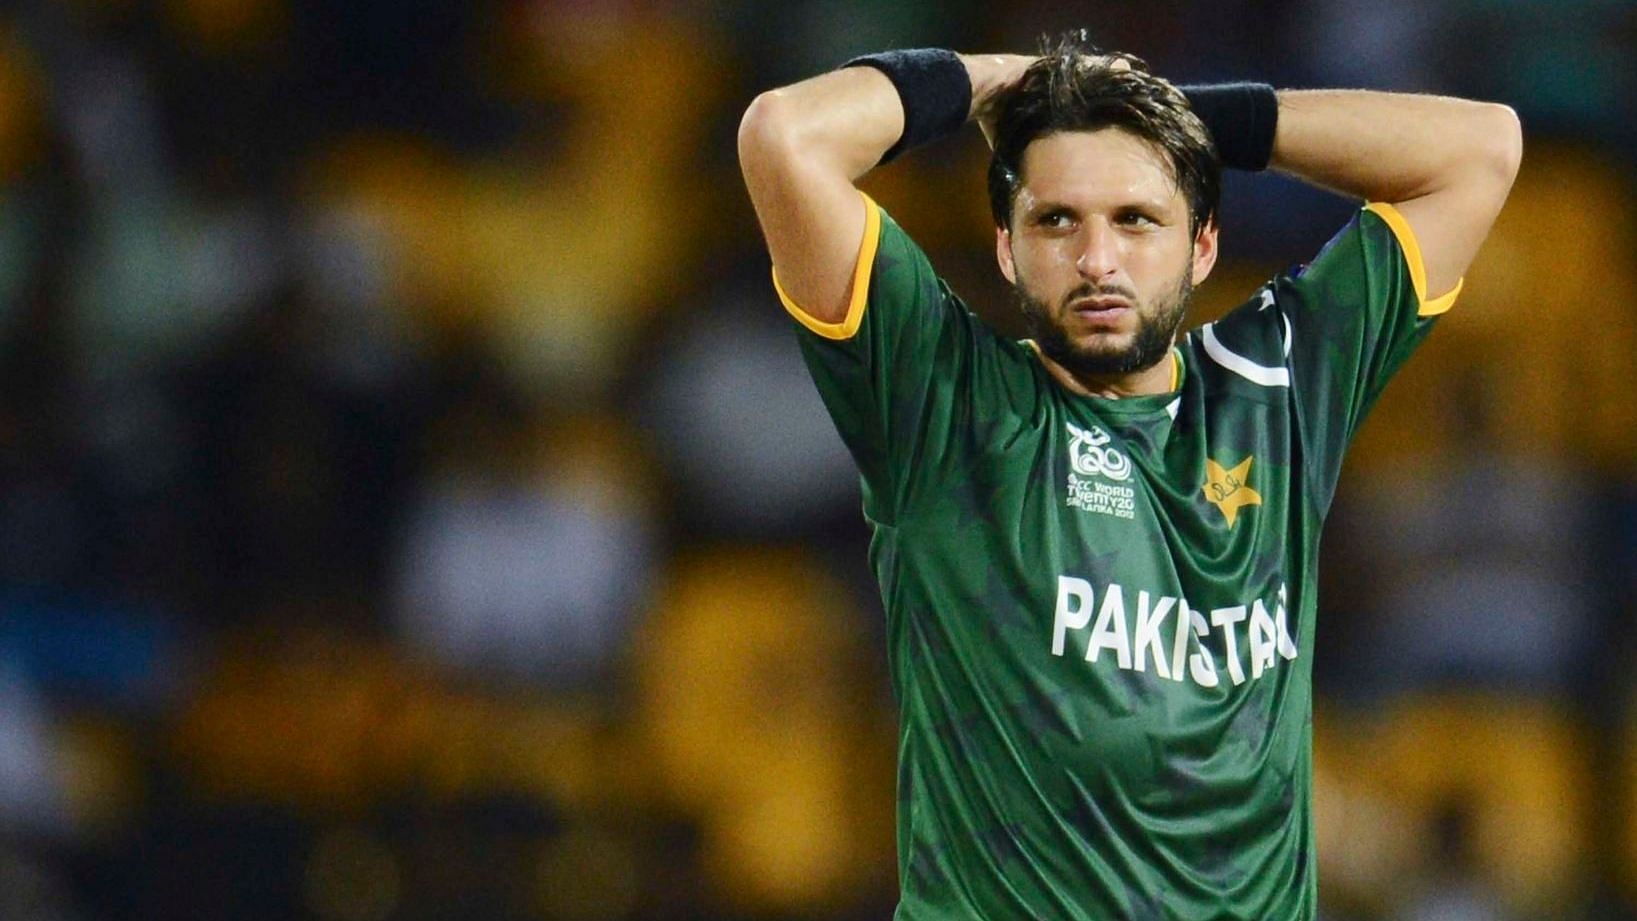 Former Pakistan Captain Shahid Afridi spoke in favour of resuming cricketing ties with India.&nbsp;